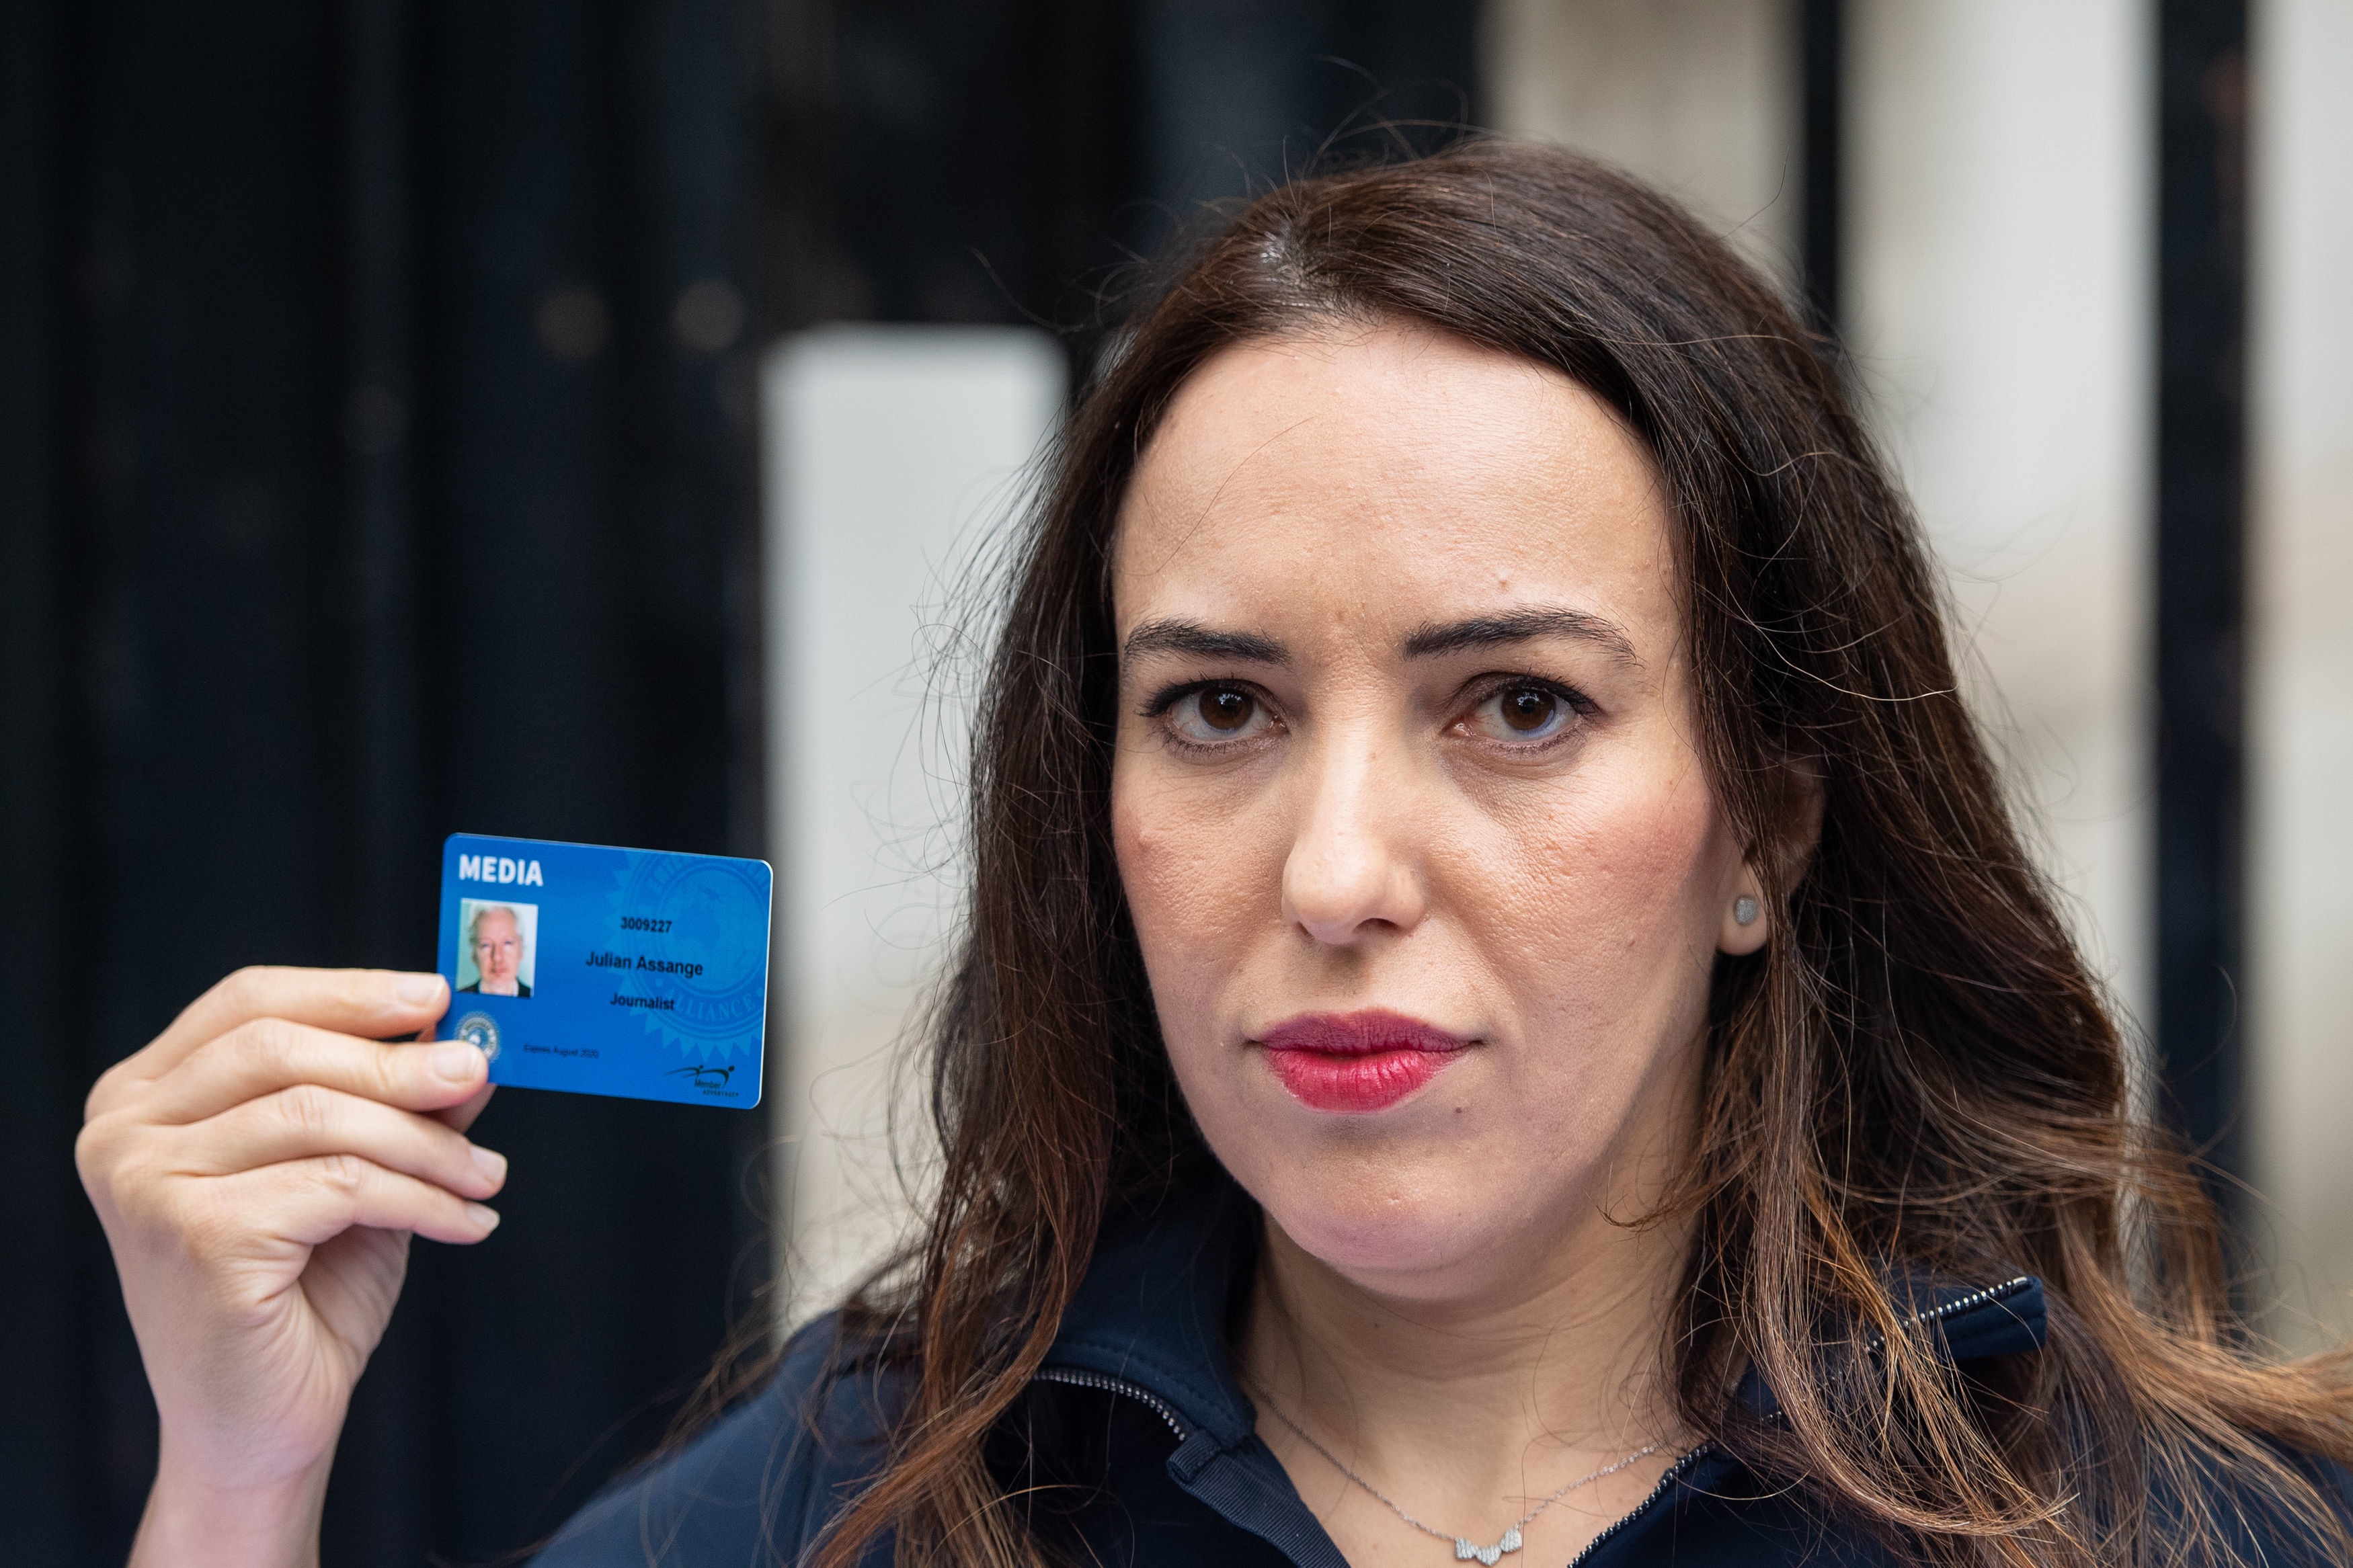 Stella Moris holds up a Julian Assange press card after attempting to deliver a Reporters Without Borders petition against the extradition of her partner.